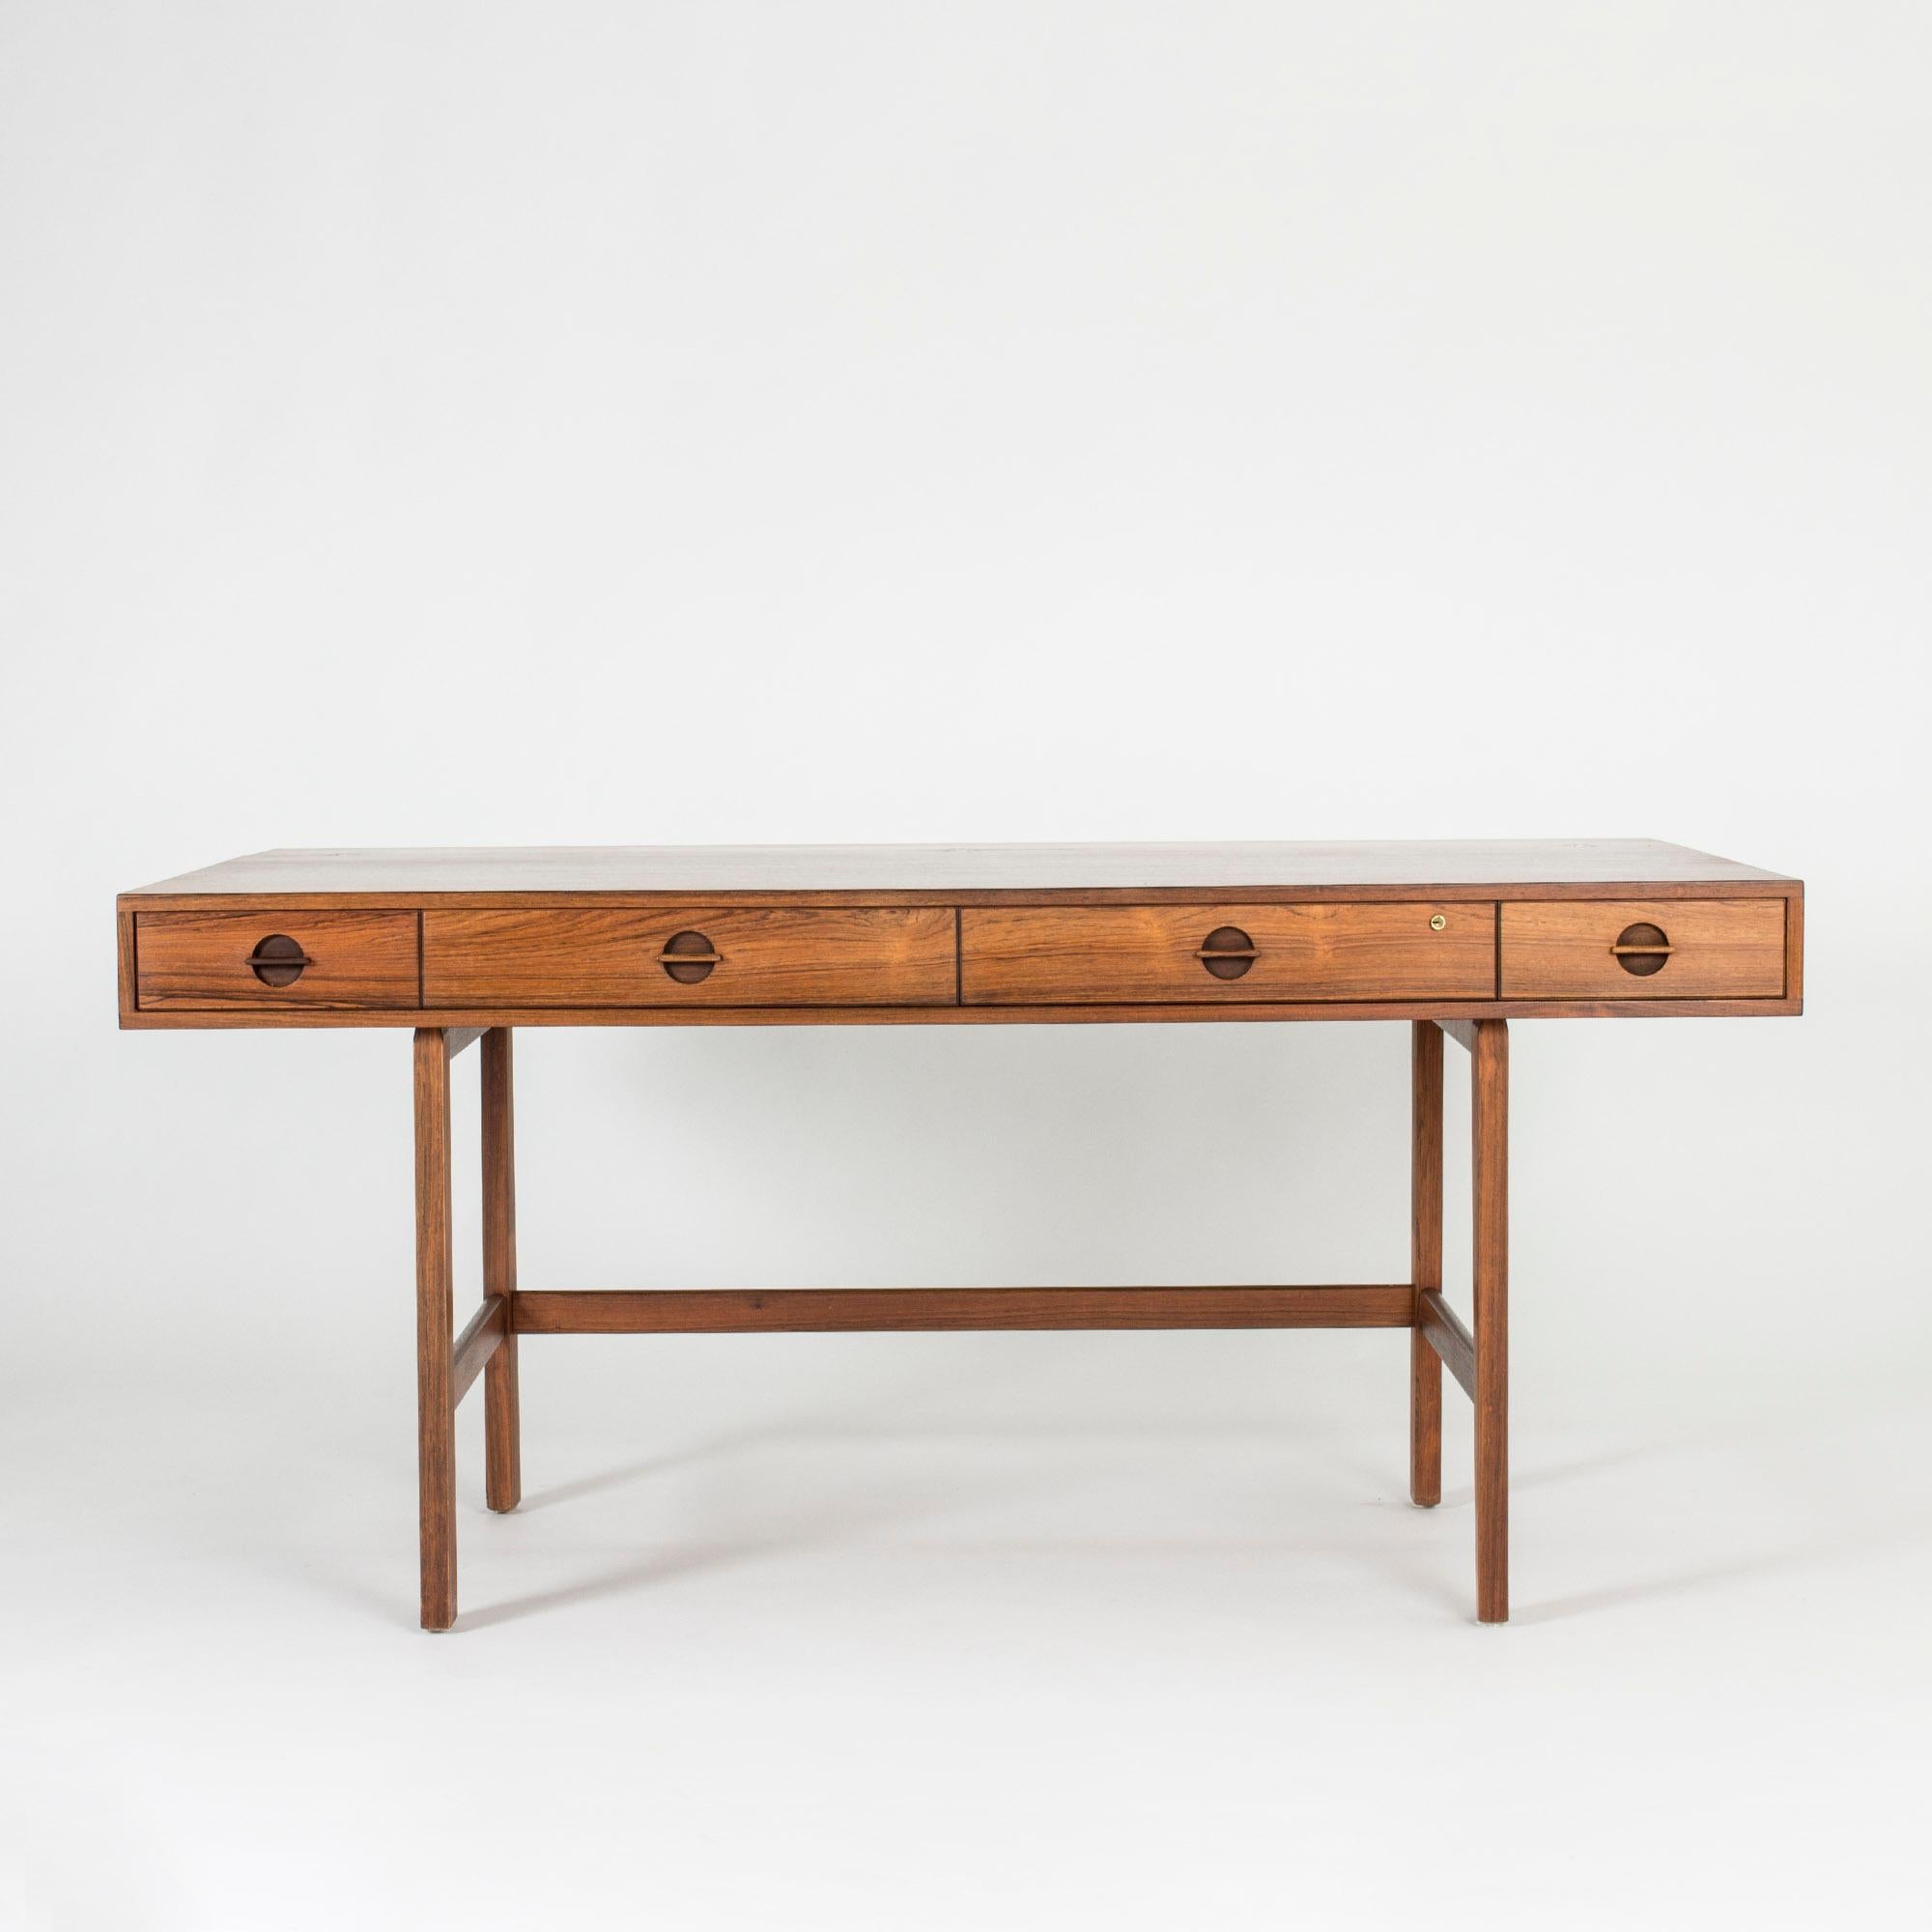 Amazing, versatile desk by Peter Løvig Nielsen, made in beautiful rosewood. The shelf on the tabletop can be flipped to extend the depth of the desk. Shelves on both sides. Nice attention to detail in the handles on the drawers and in the design of